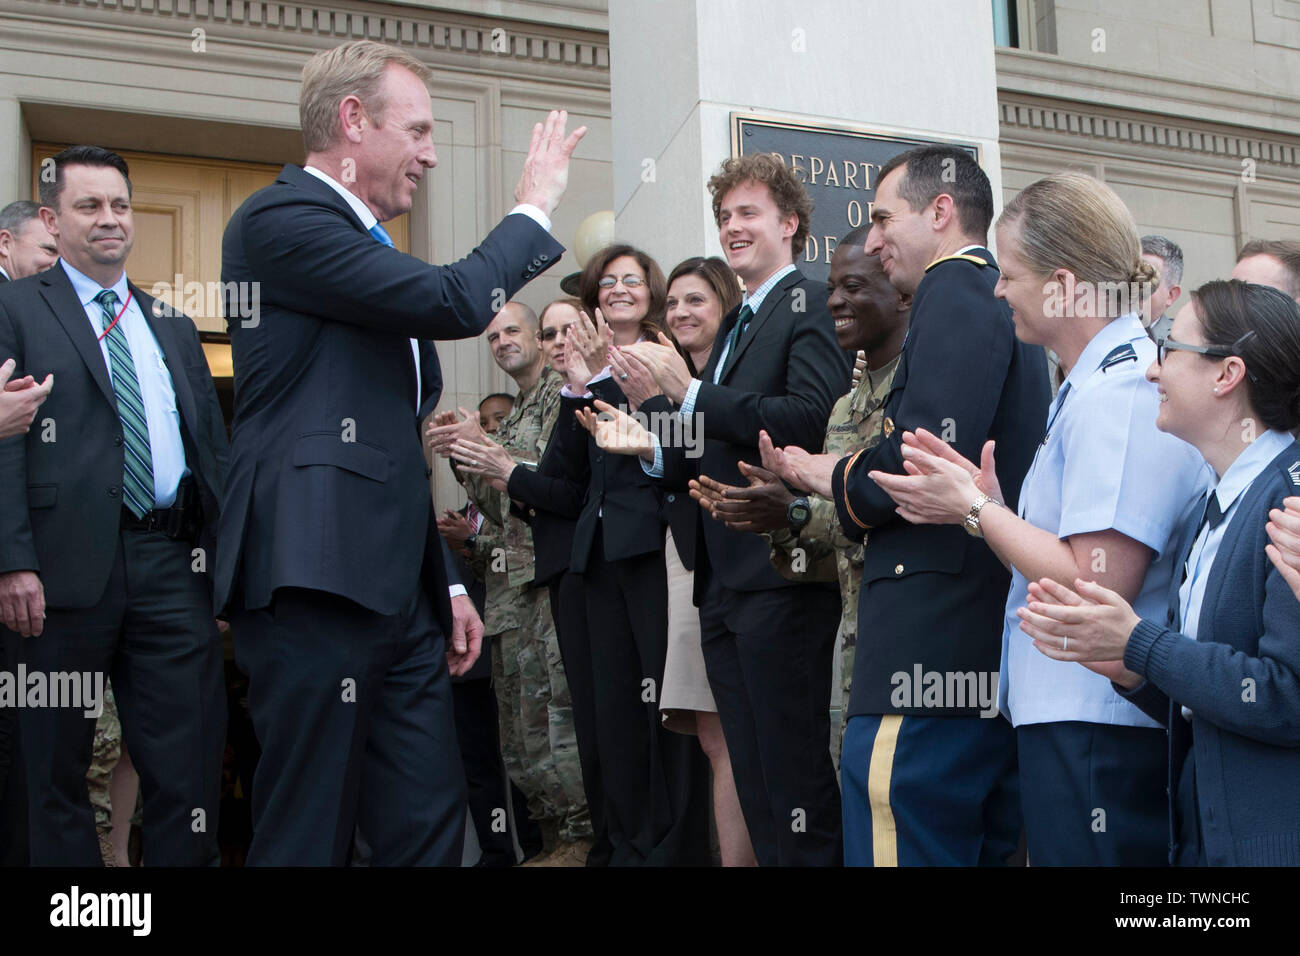 Outgoing Acting U.S Secretary of Defense Patrick M. Shanahan departs the Pentagon in a 'clap out' ceremony, the Pentagon, Washington, D.C., June 21, 2019. (DoD photo by Lisa Ferdinando) Stock Photo